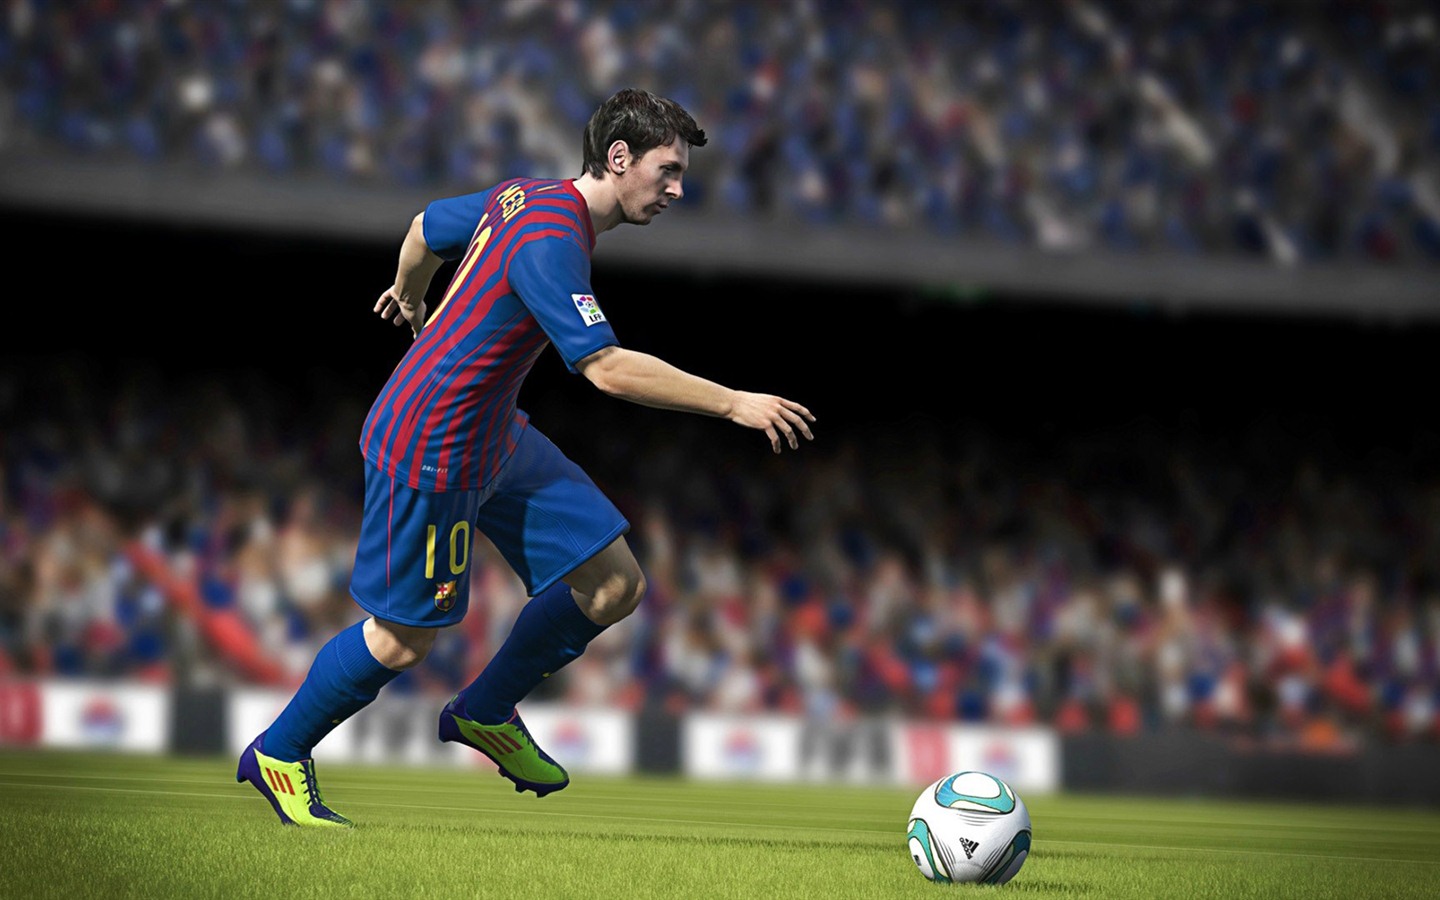 FIFA 13 game HD wallpapers #5 - 1440x900